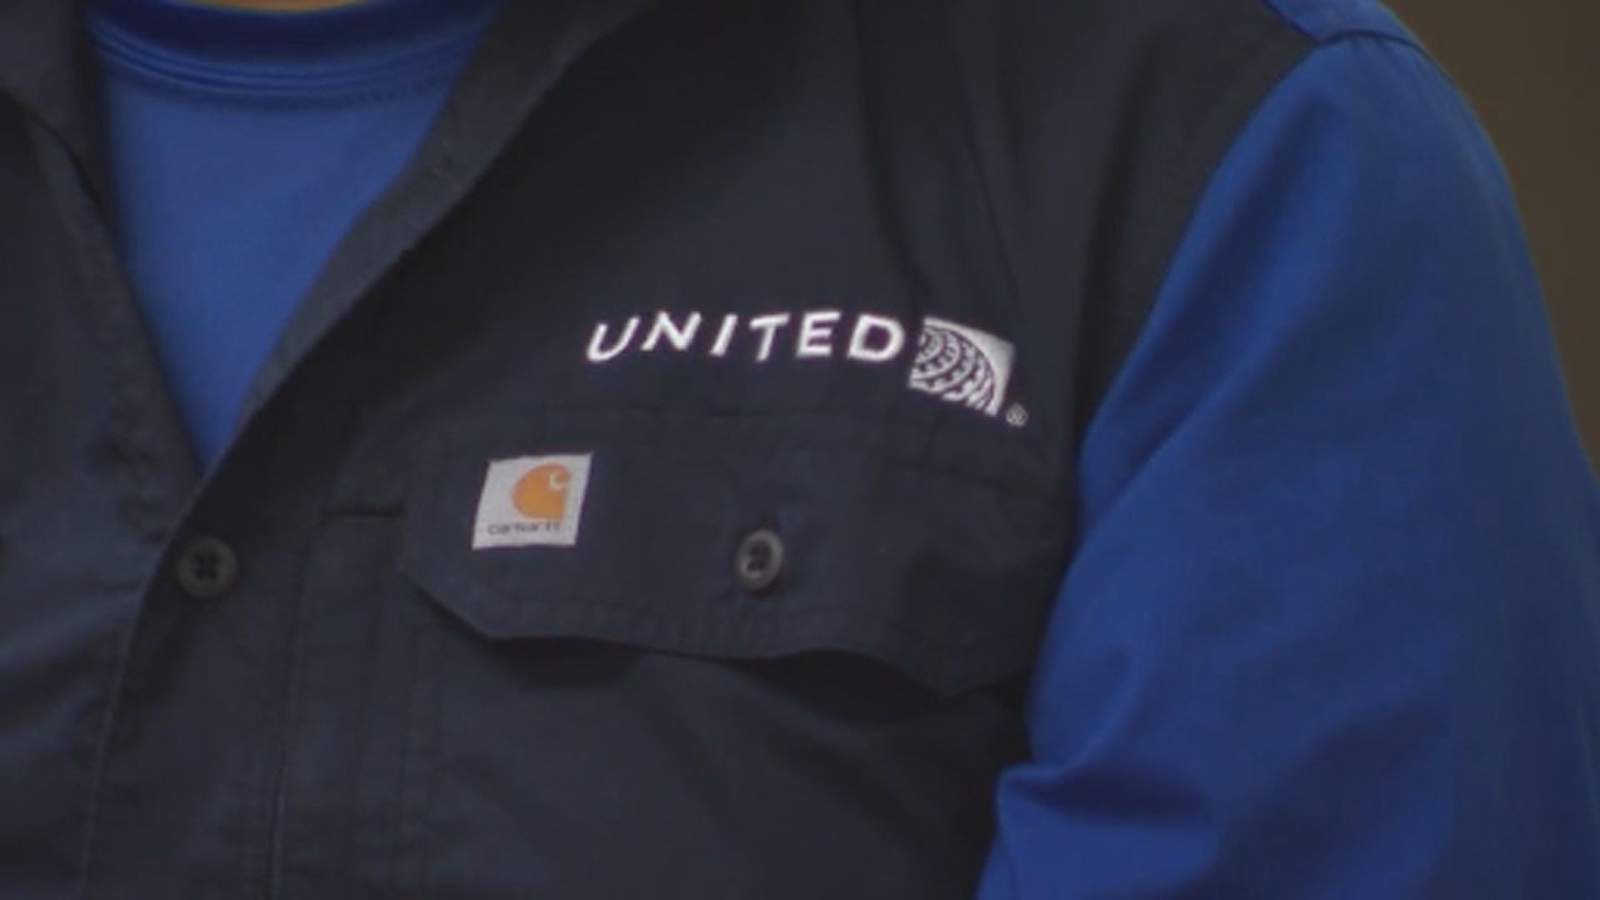 United Airlines furloughs 13,000 workers, including 1,000 in Houston area